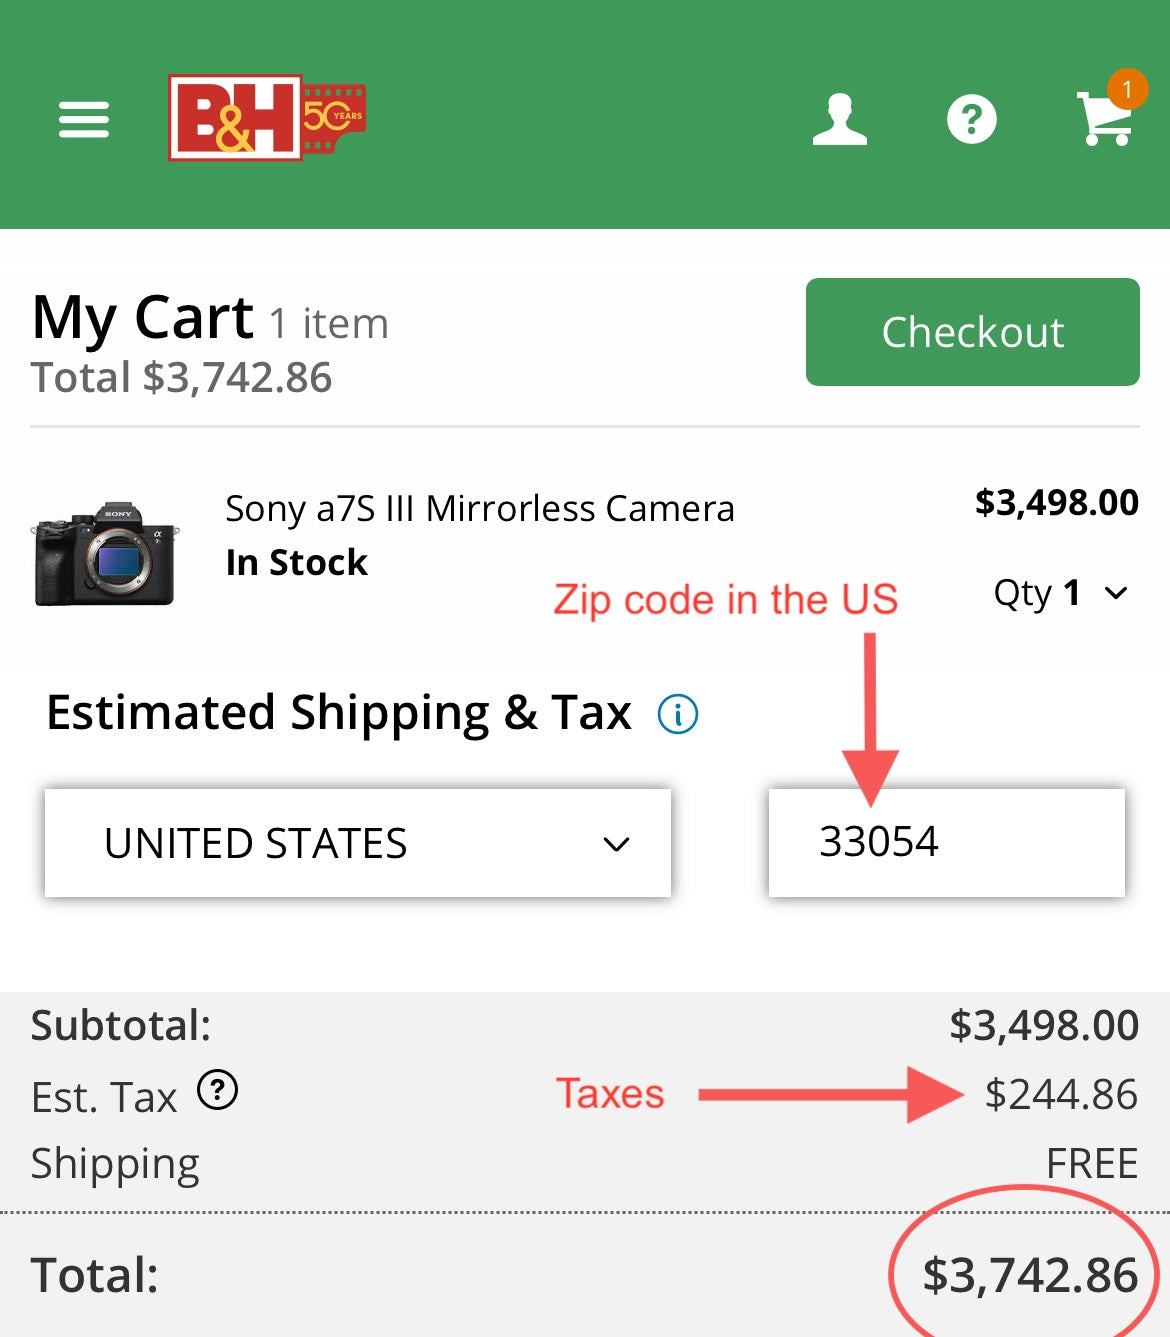 Screenshot (edited) of the B&H checkout page